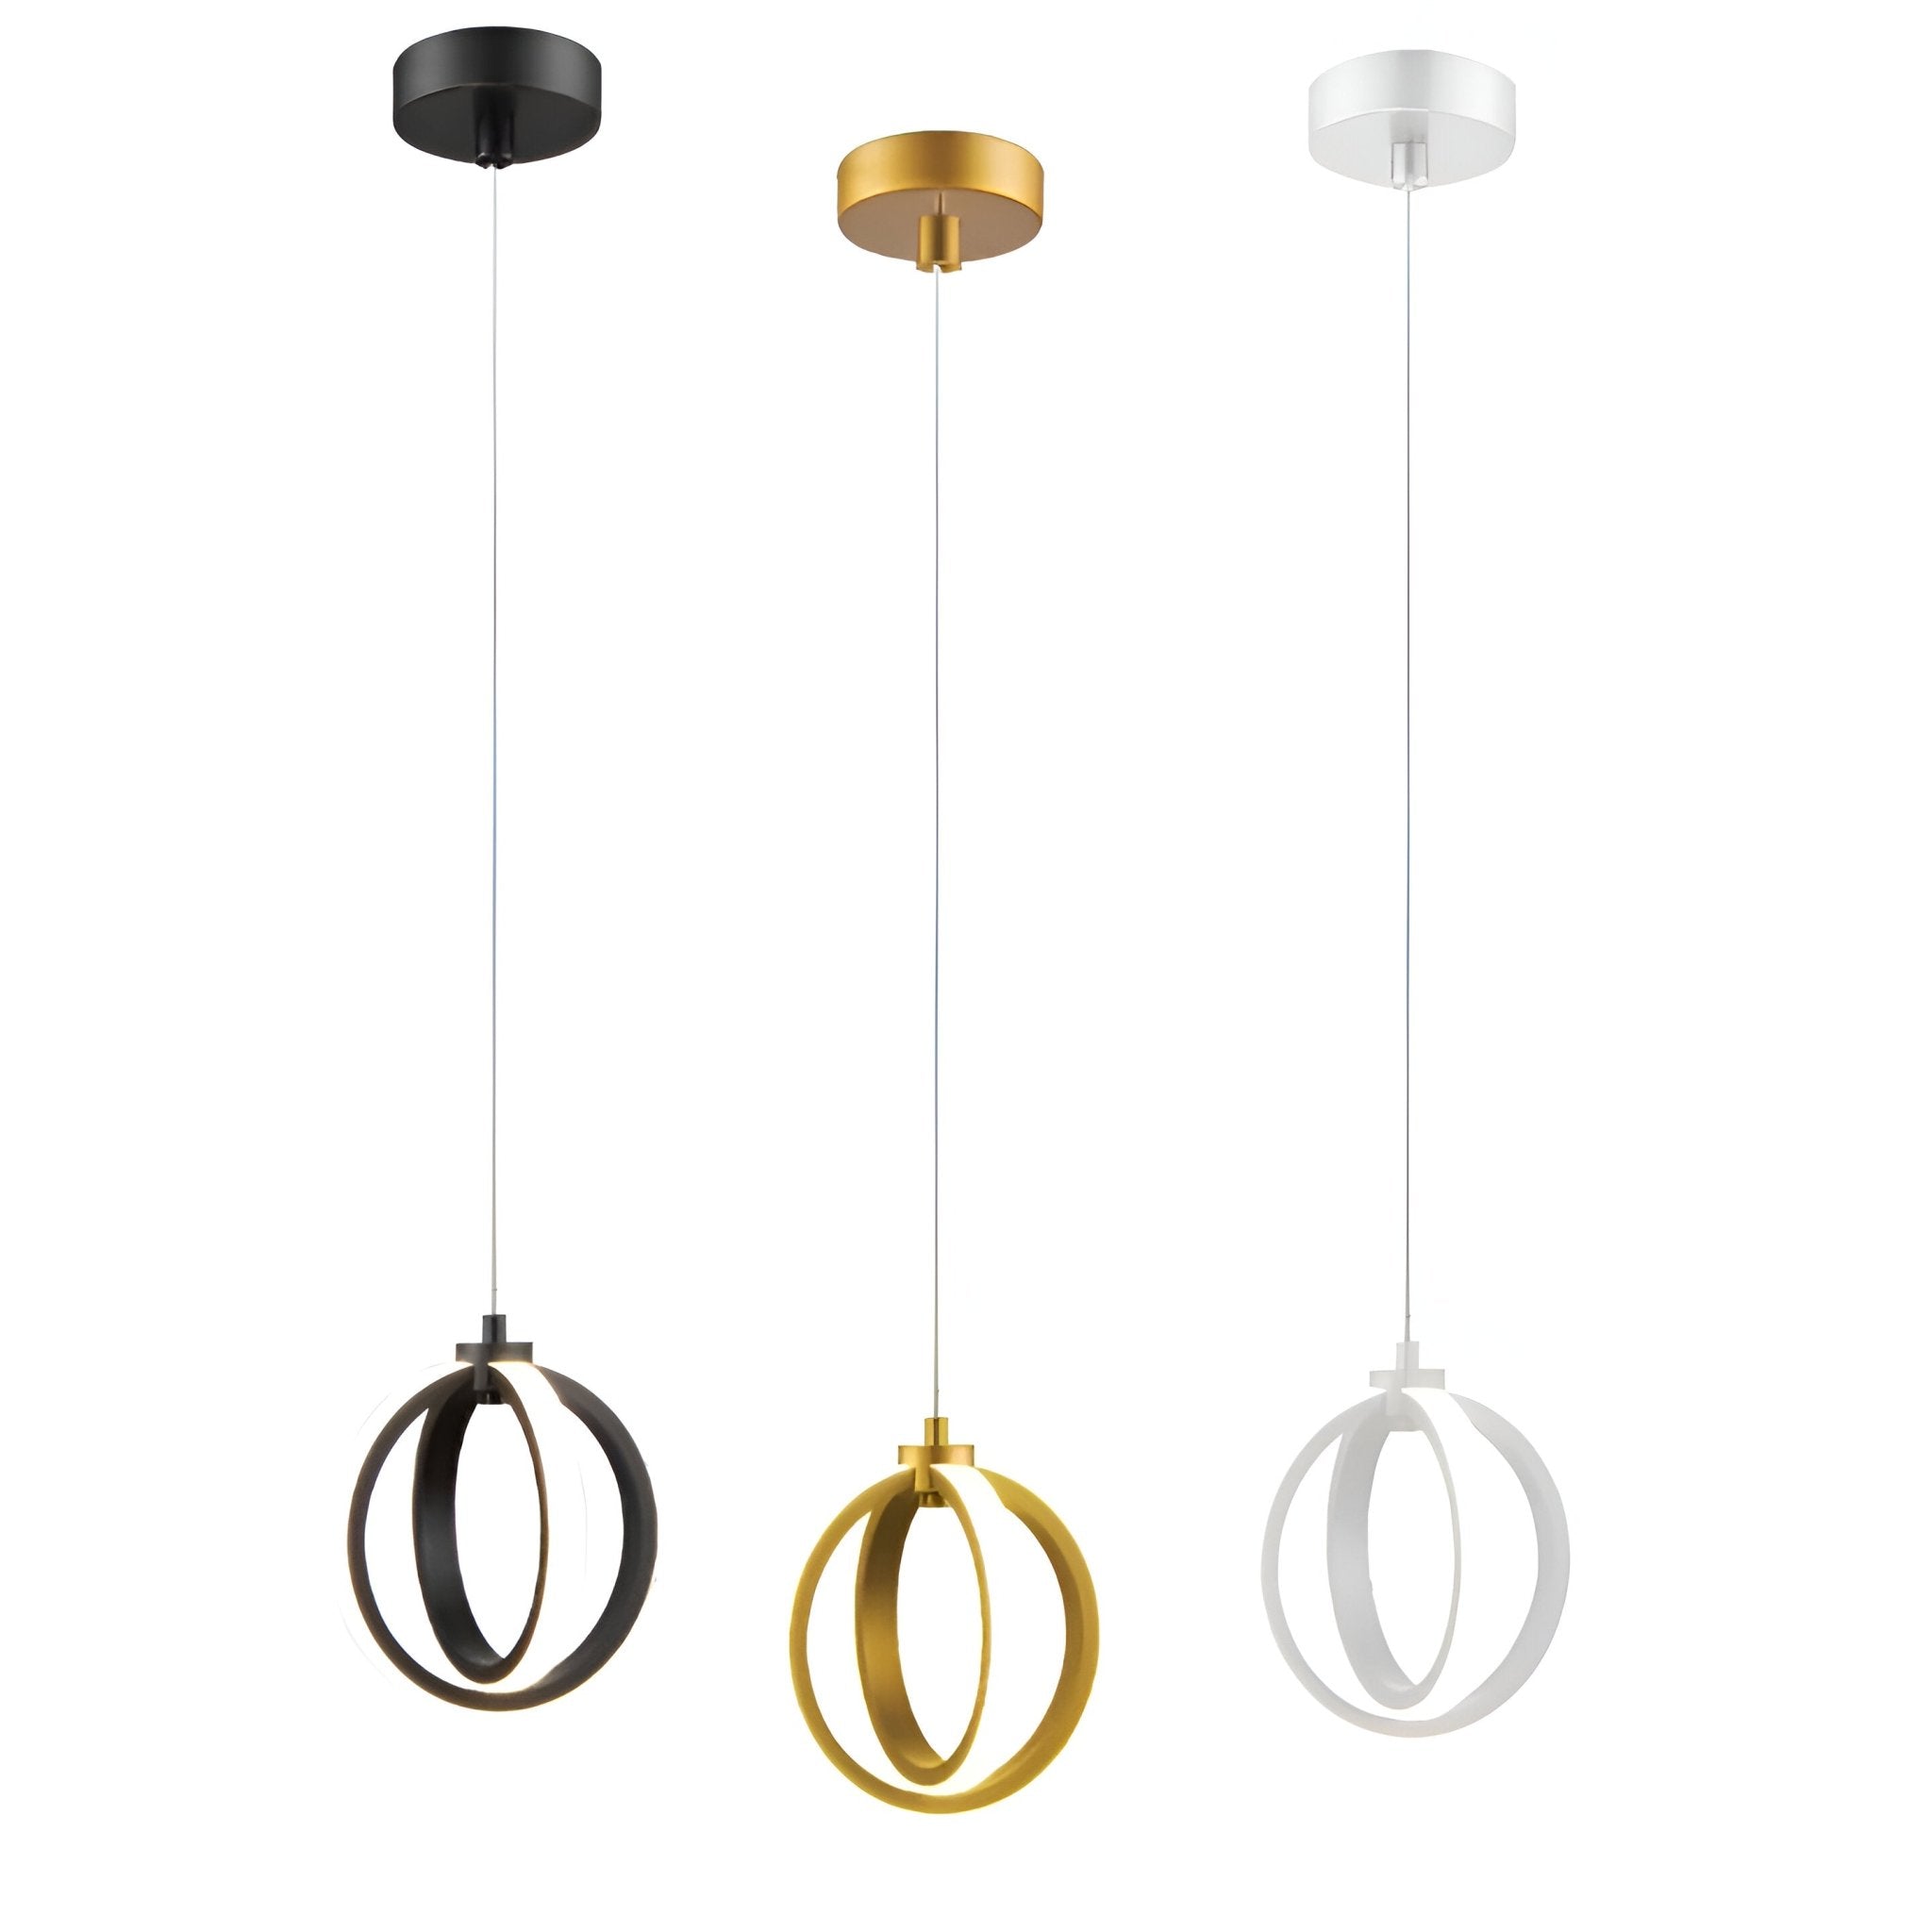 Domus SPIN-PDT 12W Led Tri-Colour Dimmable Twin Ring Pendant D170mm Trio - Mases LightingDomus